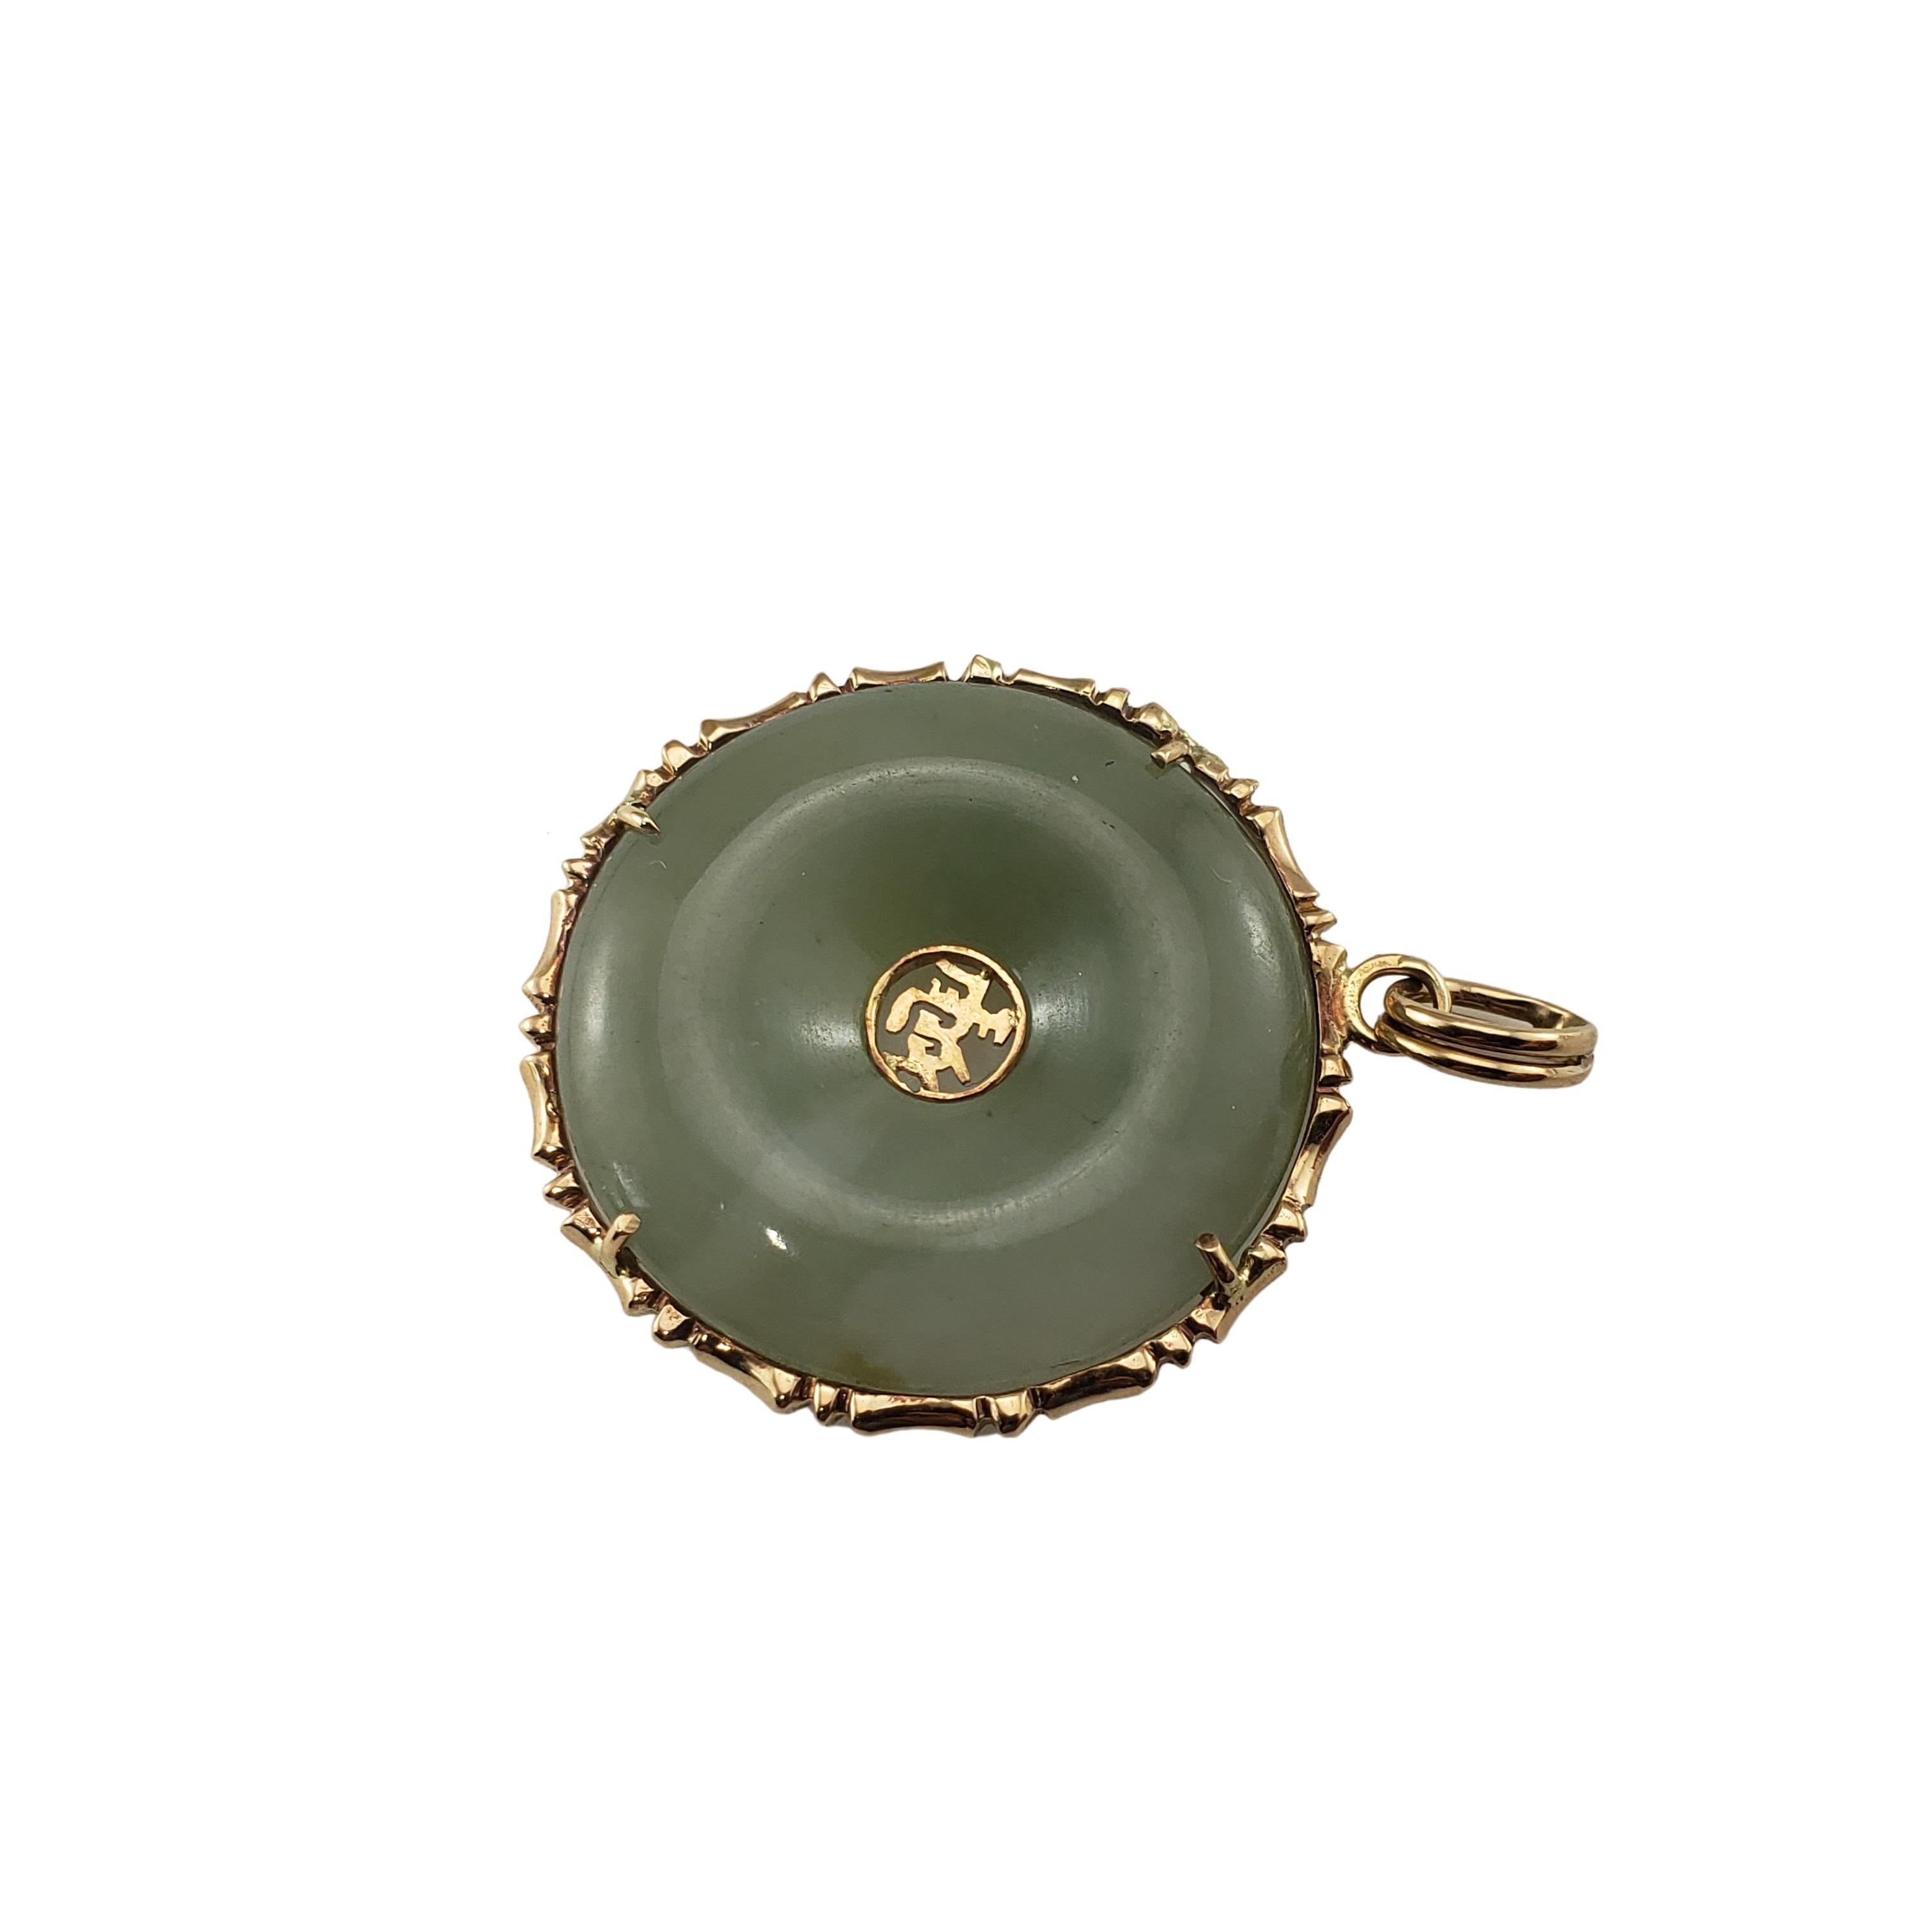 Vintage 14 Karat Yellow Gold and Jade Chinese Good Luck Pendant-

This lovely pendant features the Chinese characters for good luck and fortune. Crafted in beautifully detailed green jade and 14K yellow gold.

Size: 29 mm x 26 mm

Weight: 3.9 dwt. /